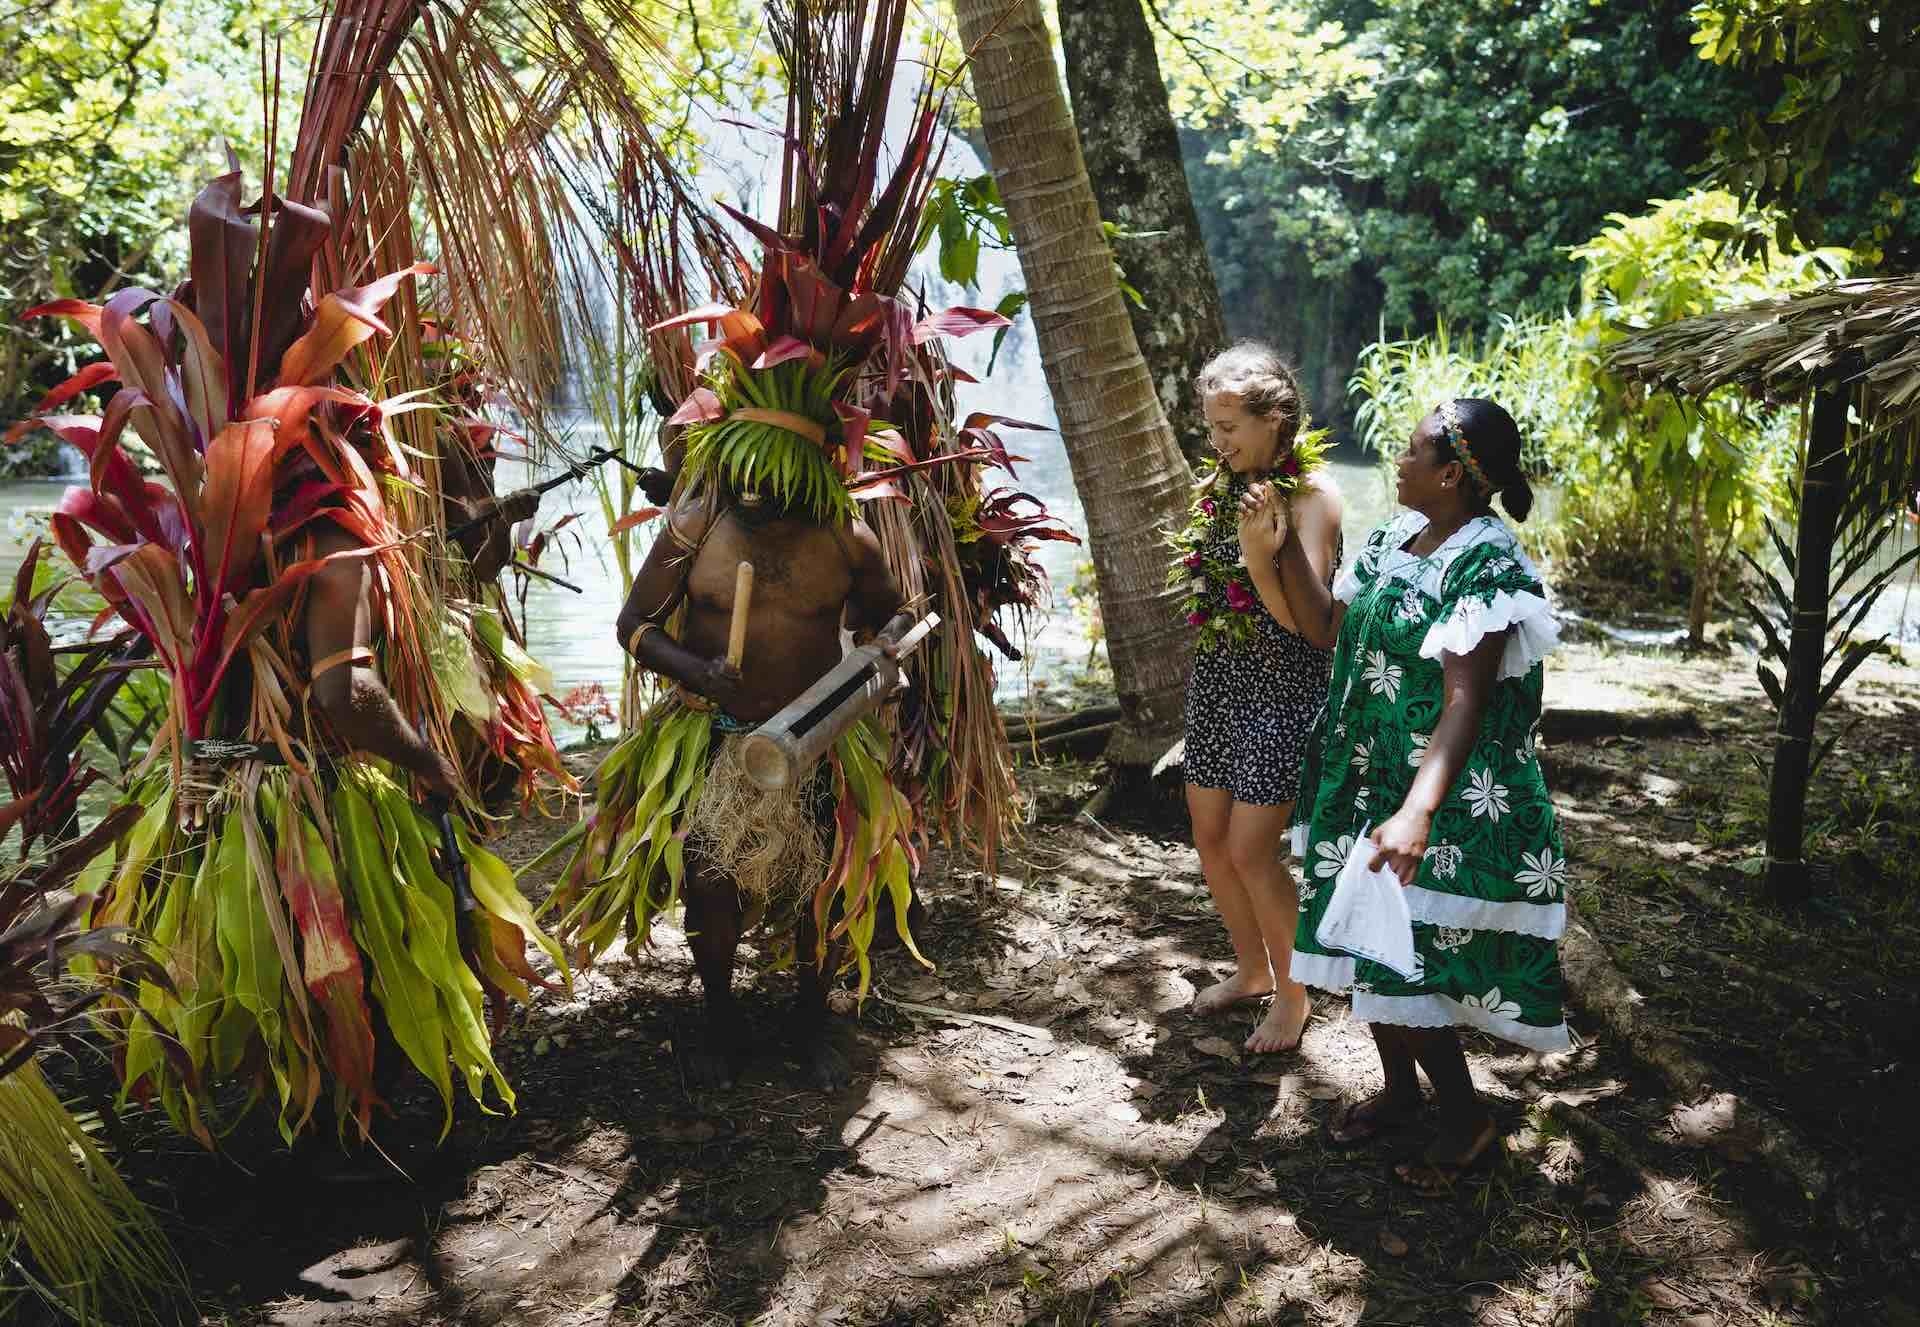 10 Things You Need To Know When Travelling Vanuatu's Outer Islands, Ruby Claire, photos by Ain Raadik and Ben Savage, custom dress, dancing, palm trees, women, Maewo - Naone falls arrival dance